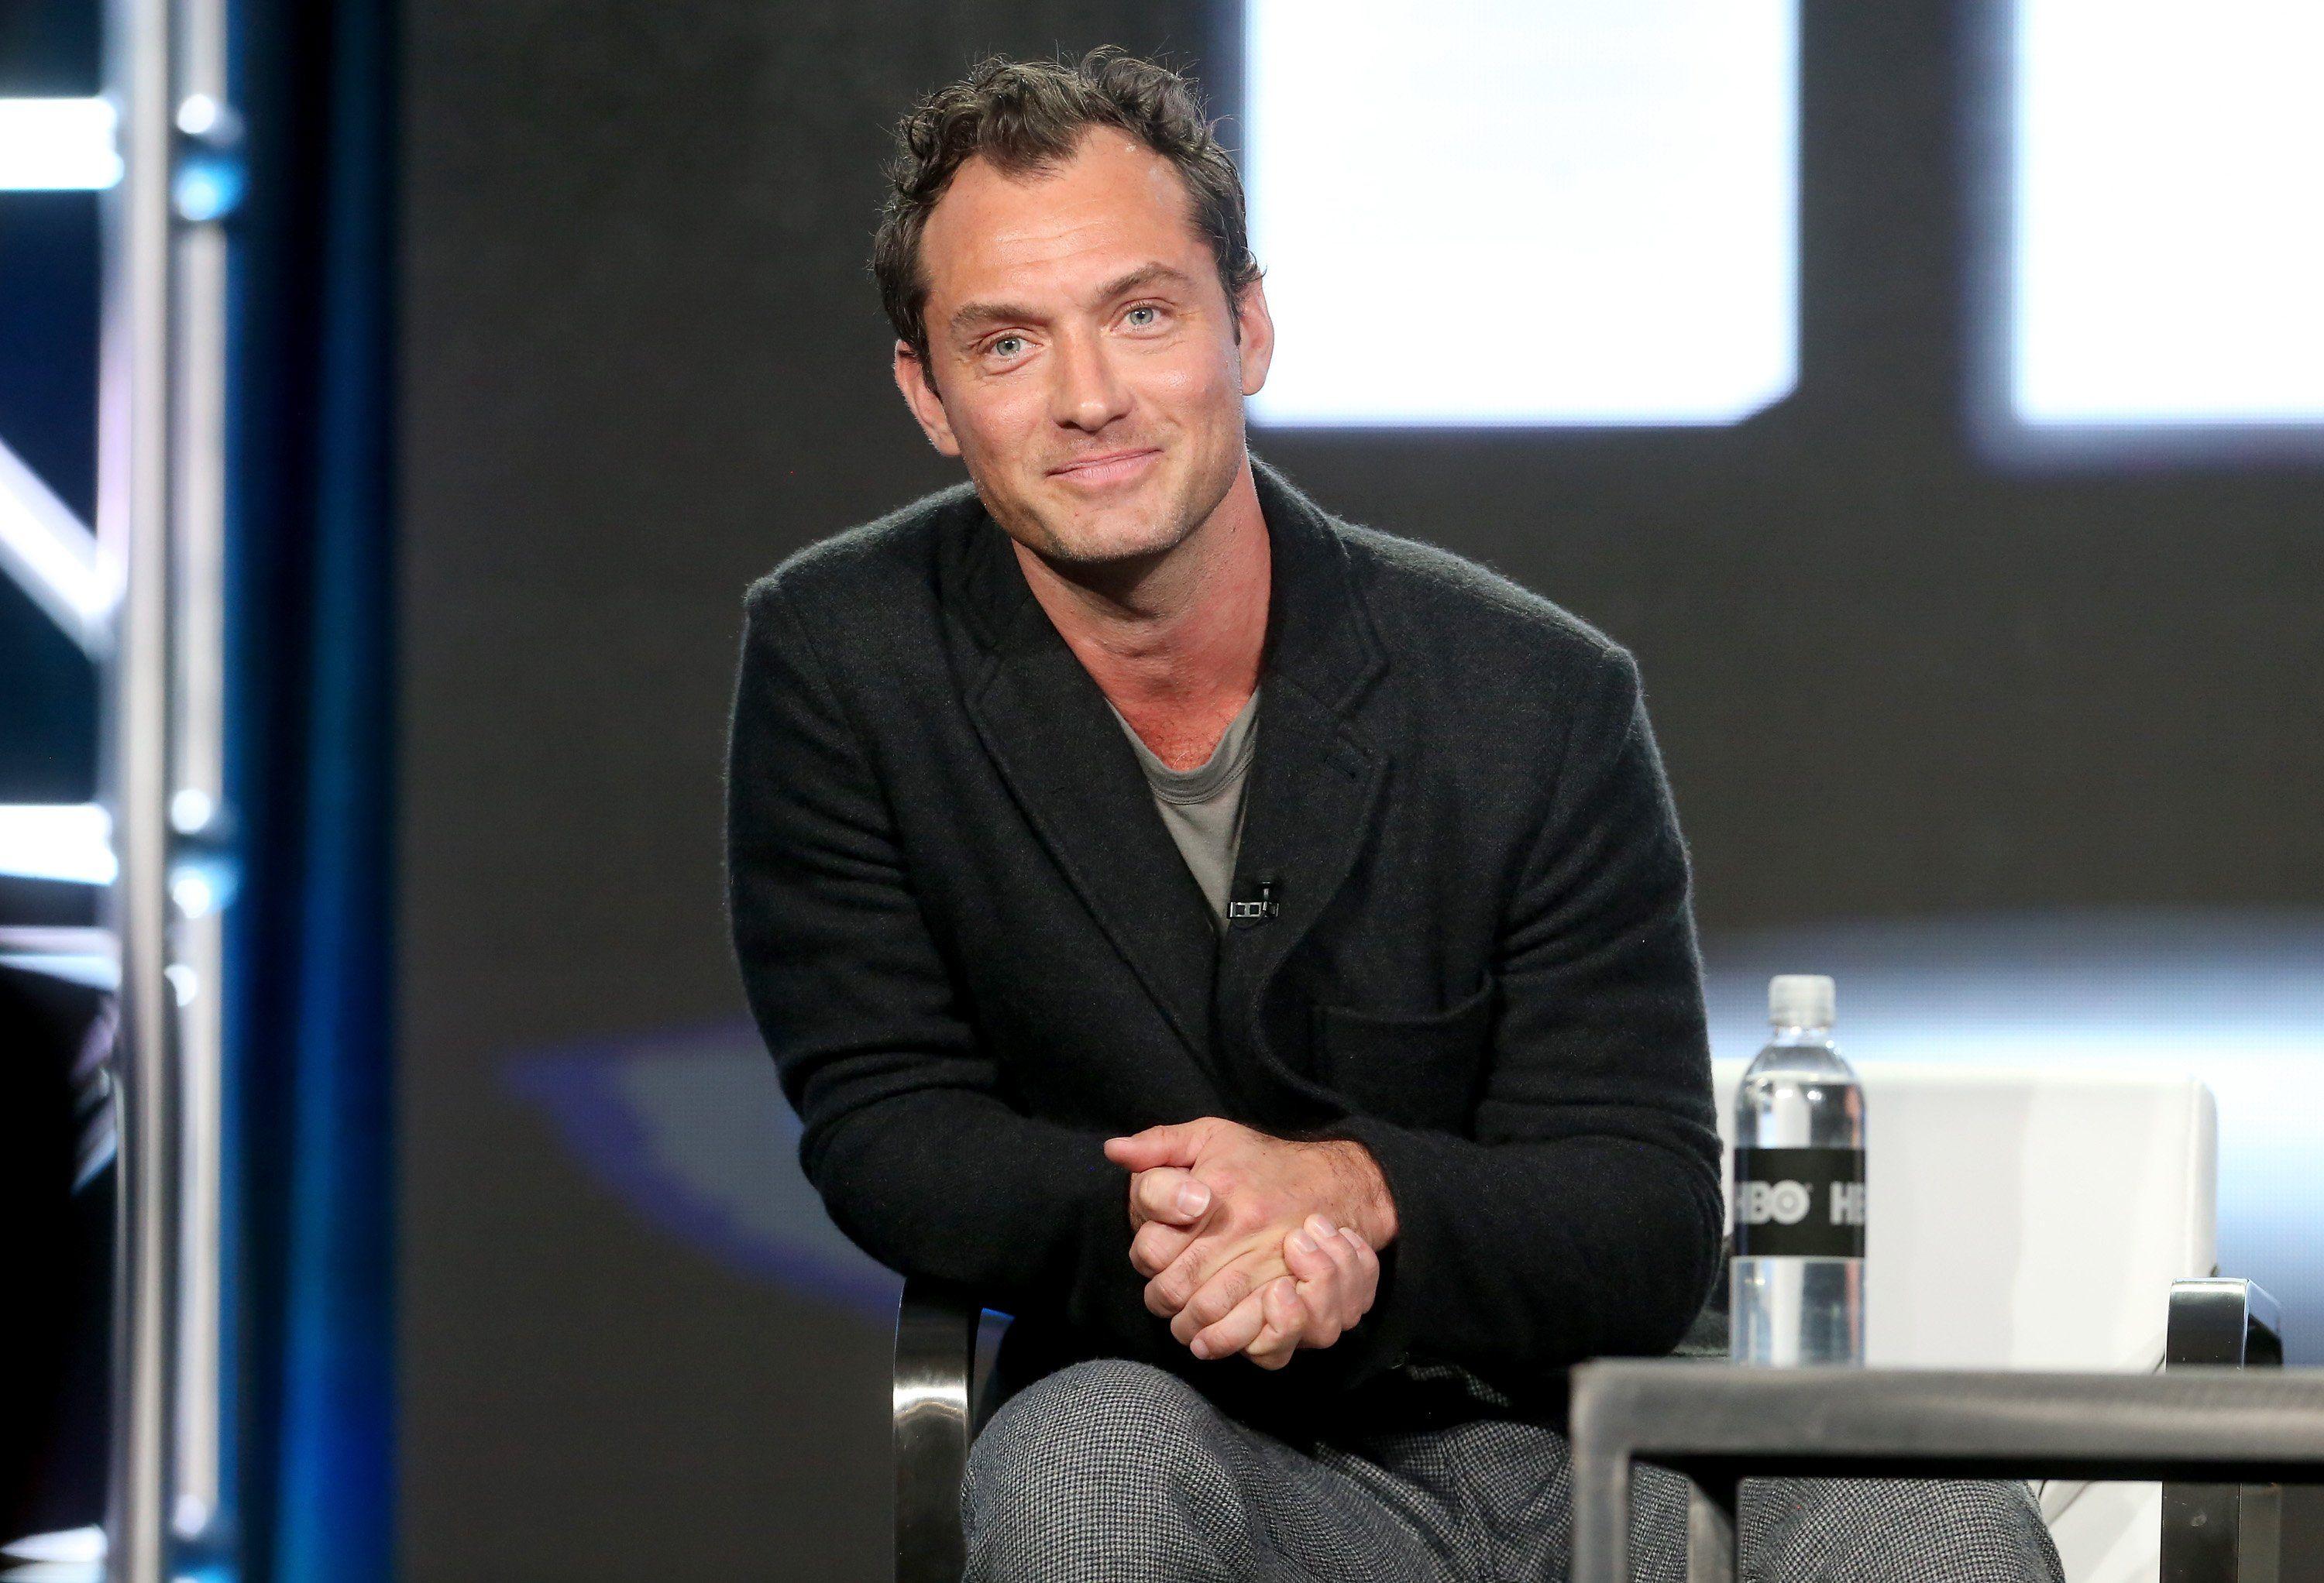 Jude Law To Play Young Dumbledore In 'Fantastic Beasts' Sequel